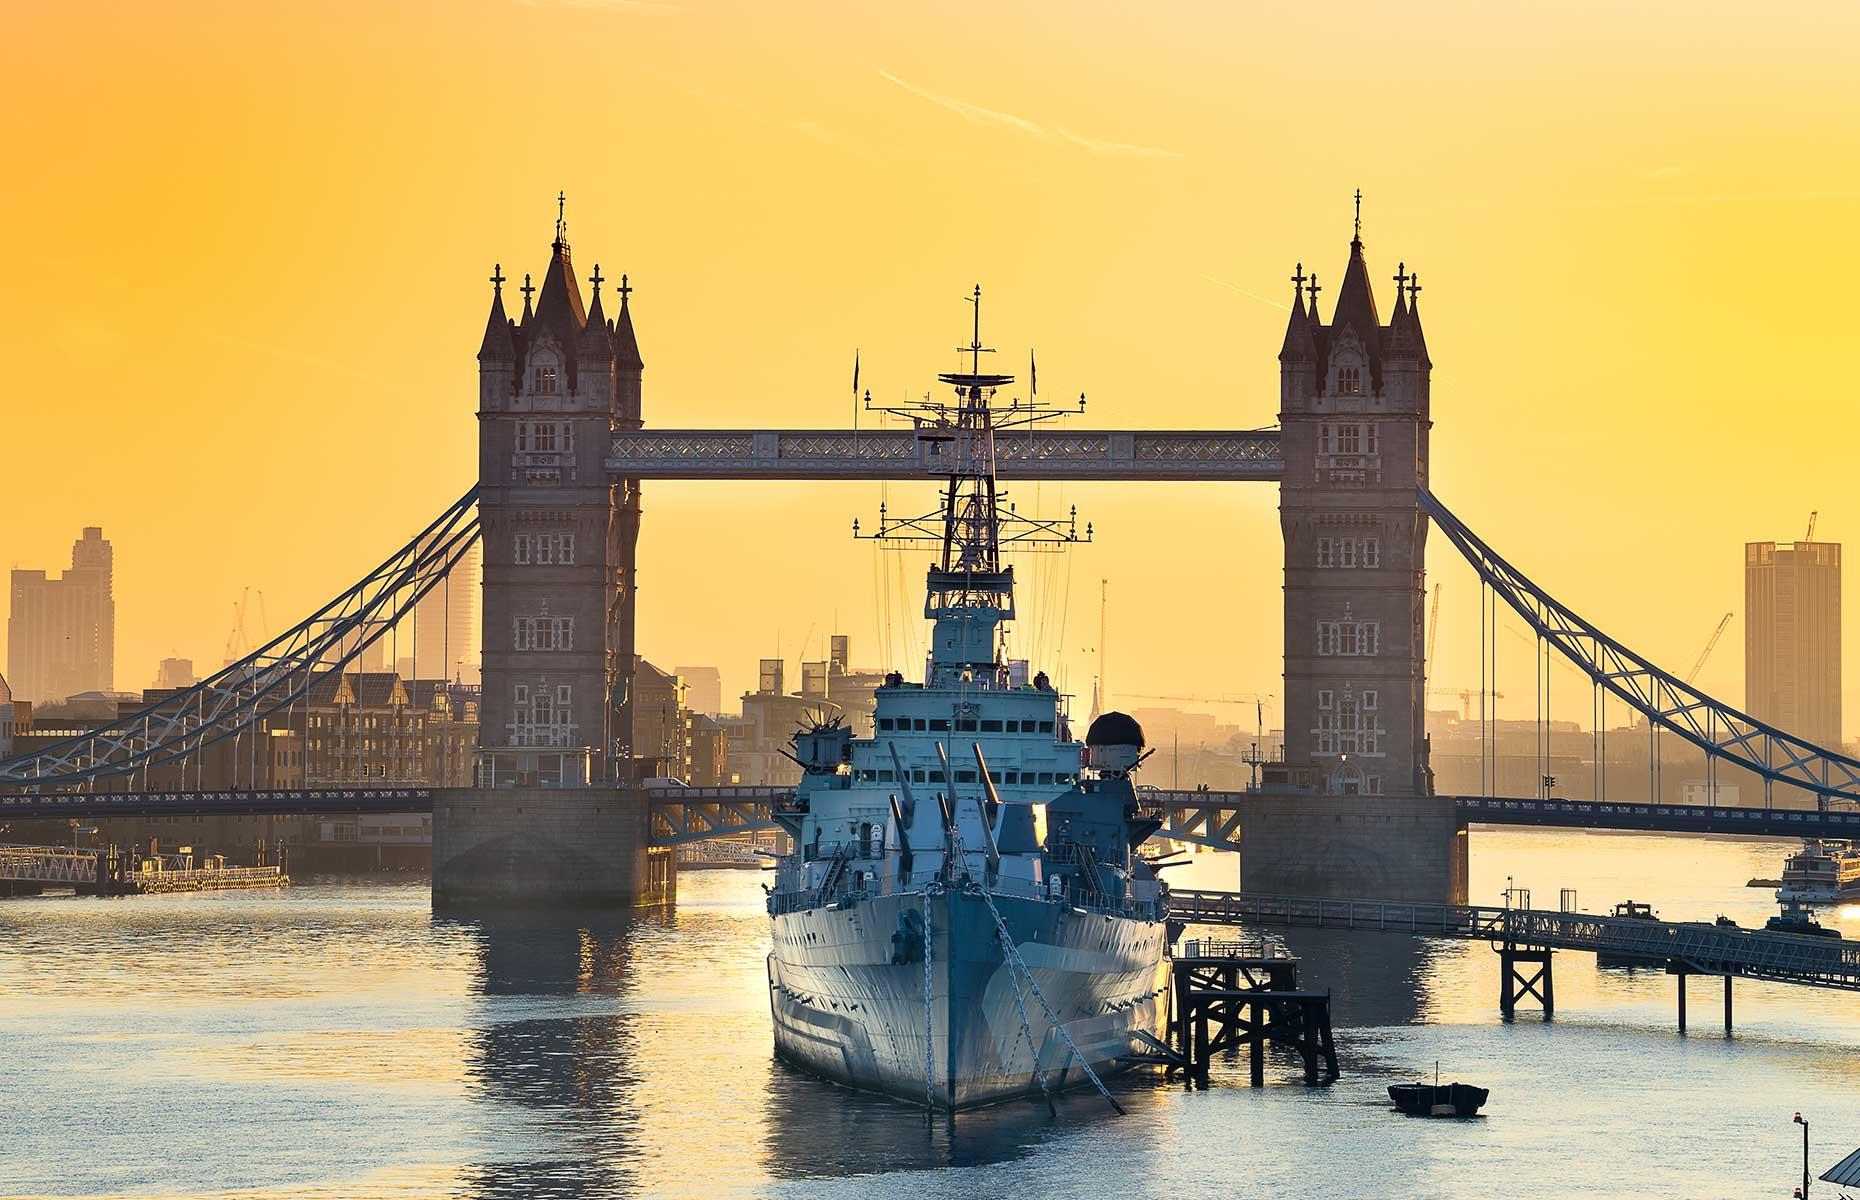 Moored on the south side of the River Thames, between London Bridge and Tower Bridge, HMS Belfast is the last remaining ship of her type. Launched in 1938, the battle cruiser saw active service for 25 years, including during the Second World War, before opening as a tourist attraction in 1971.